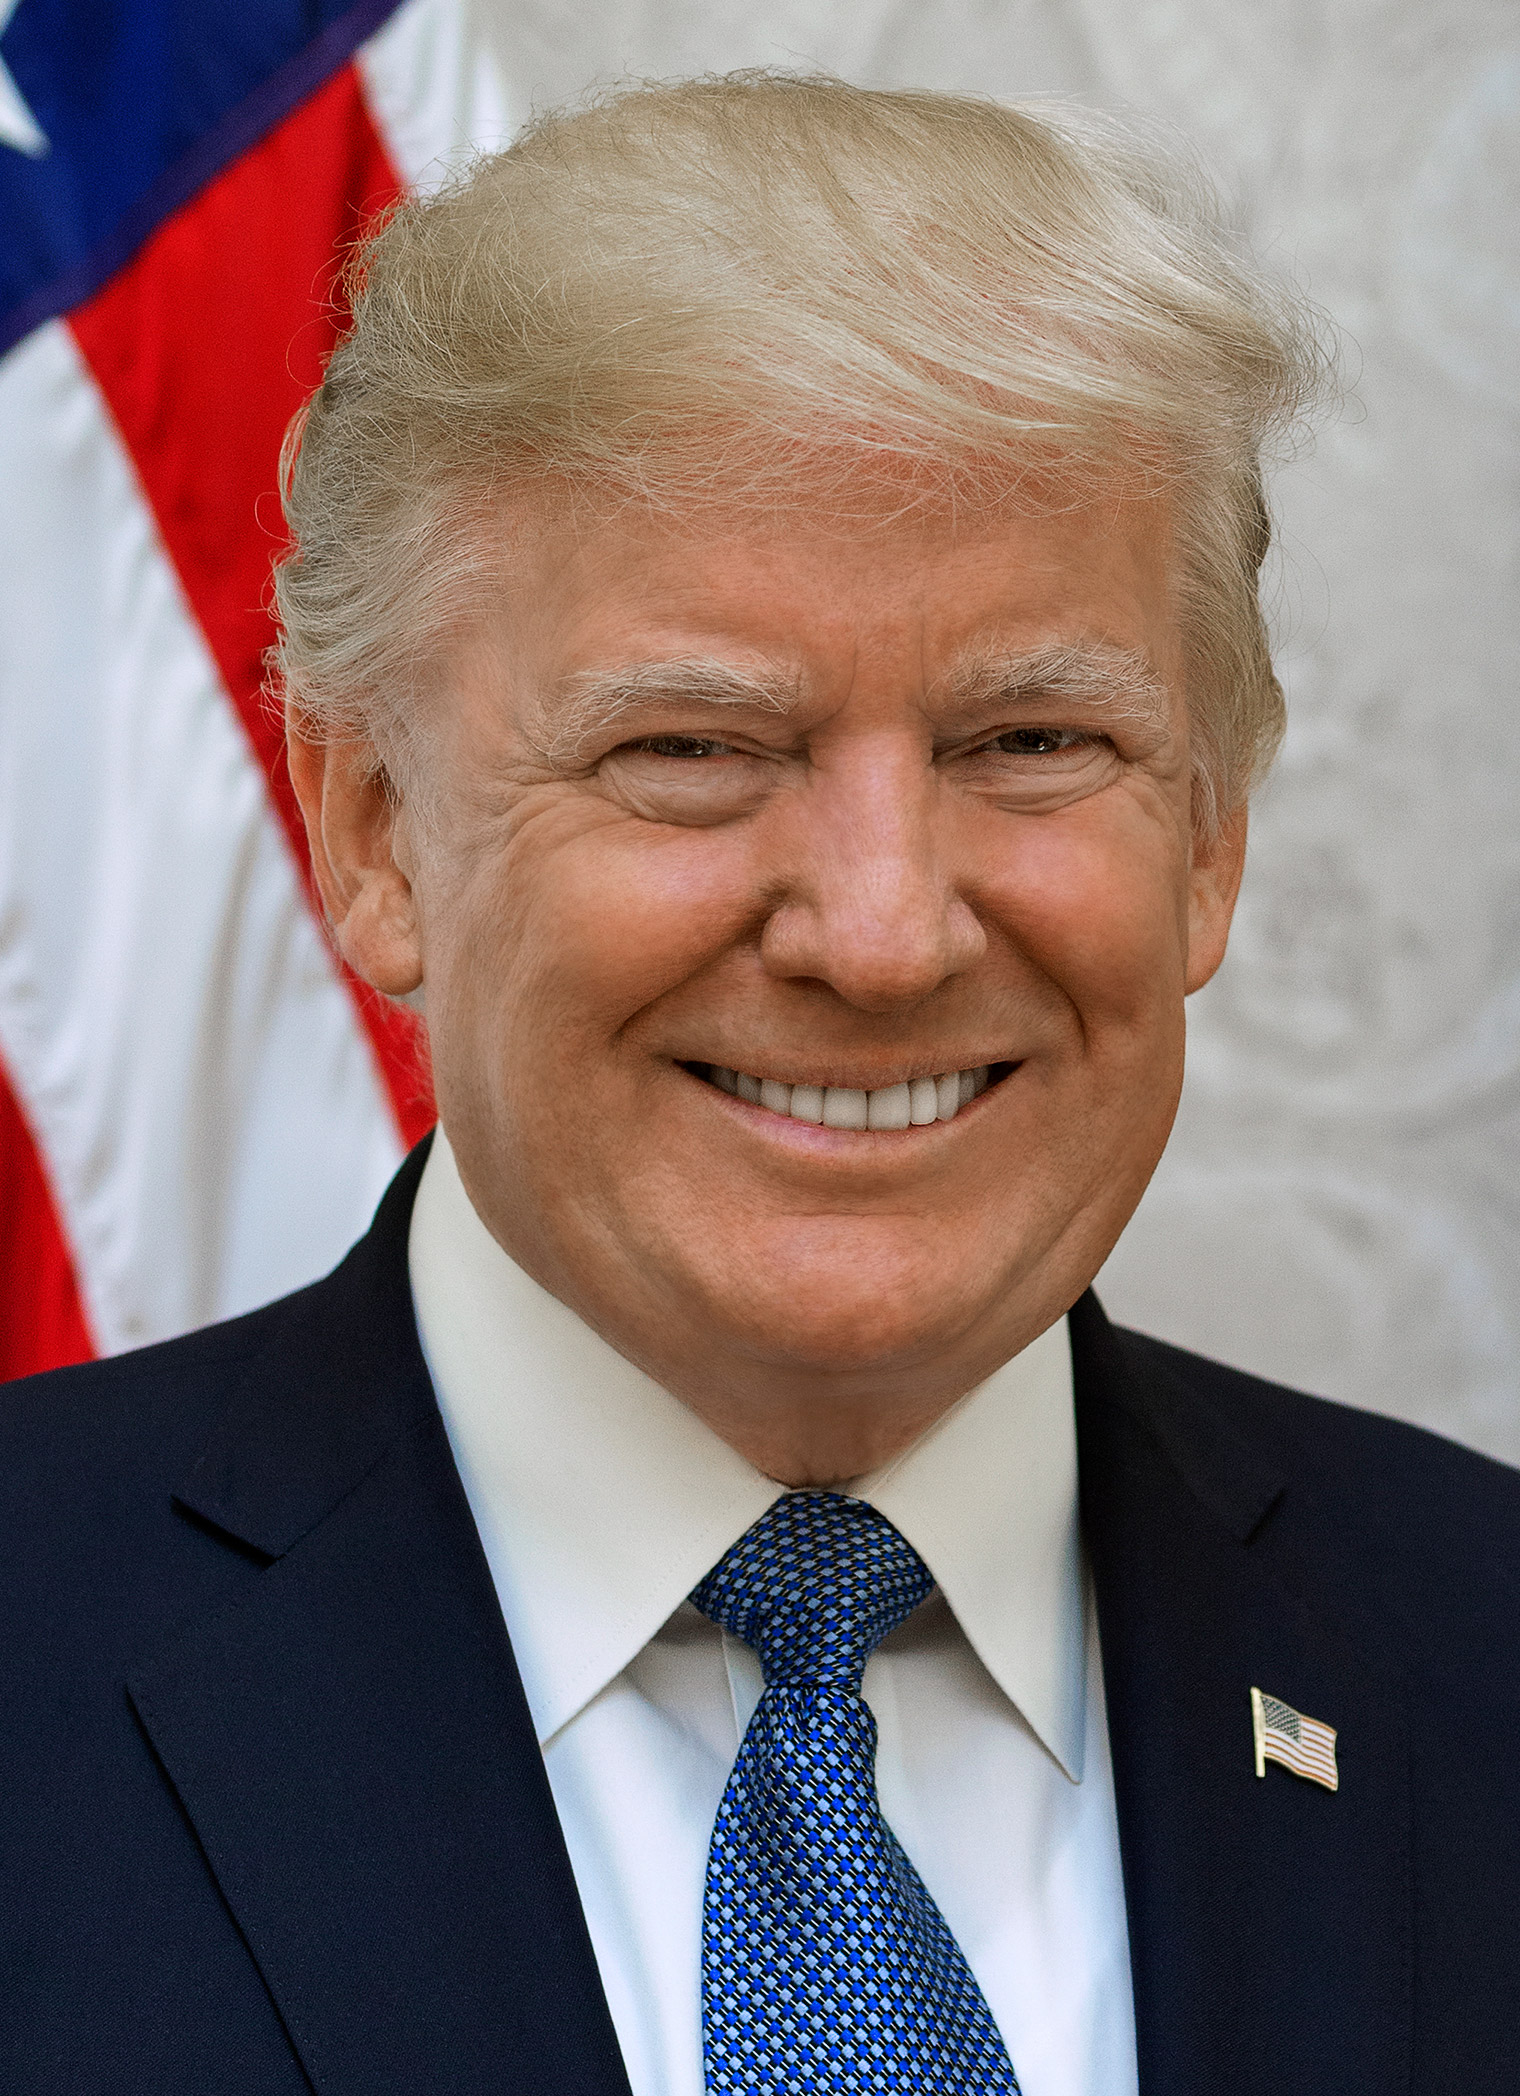 45th President of the United States Donald J. Trump